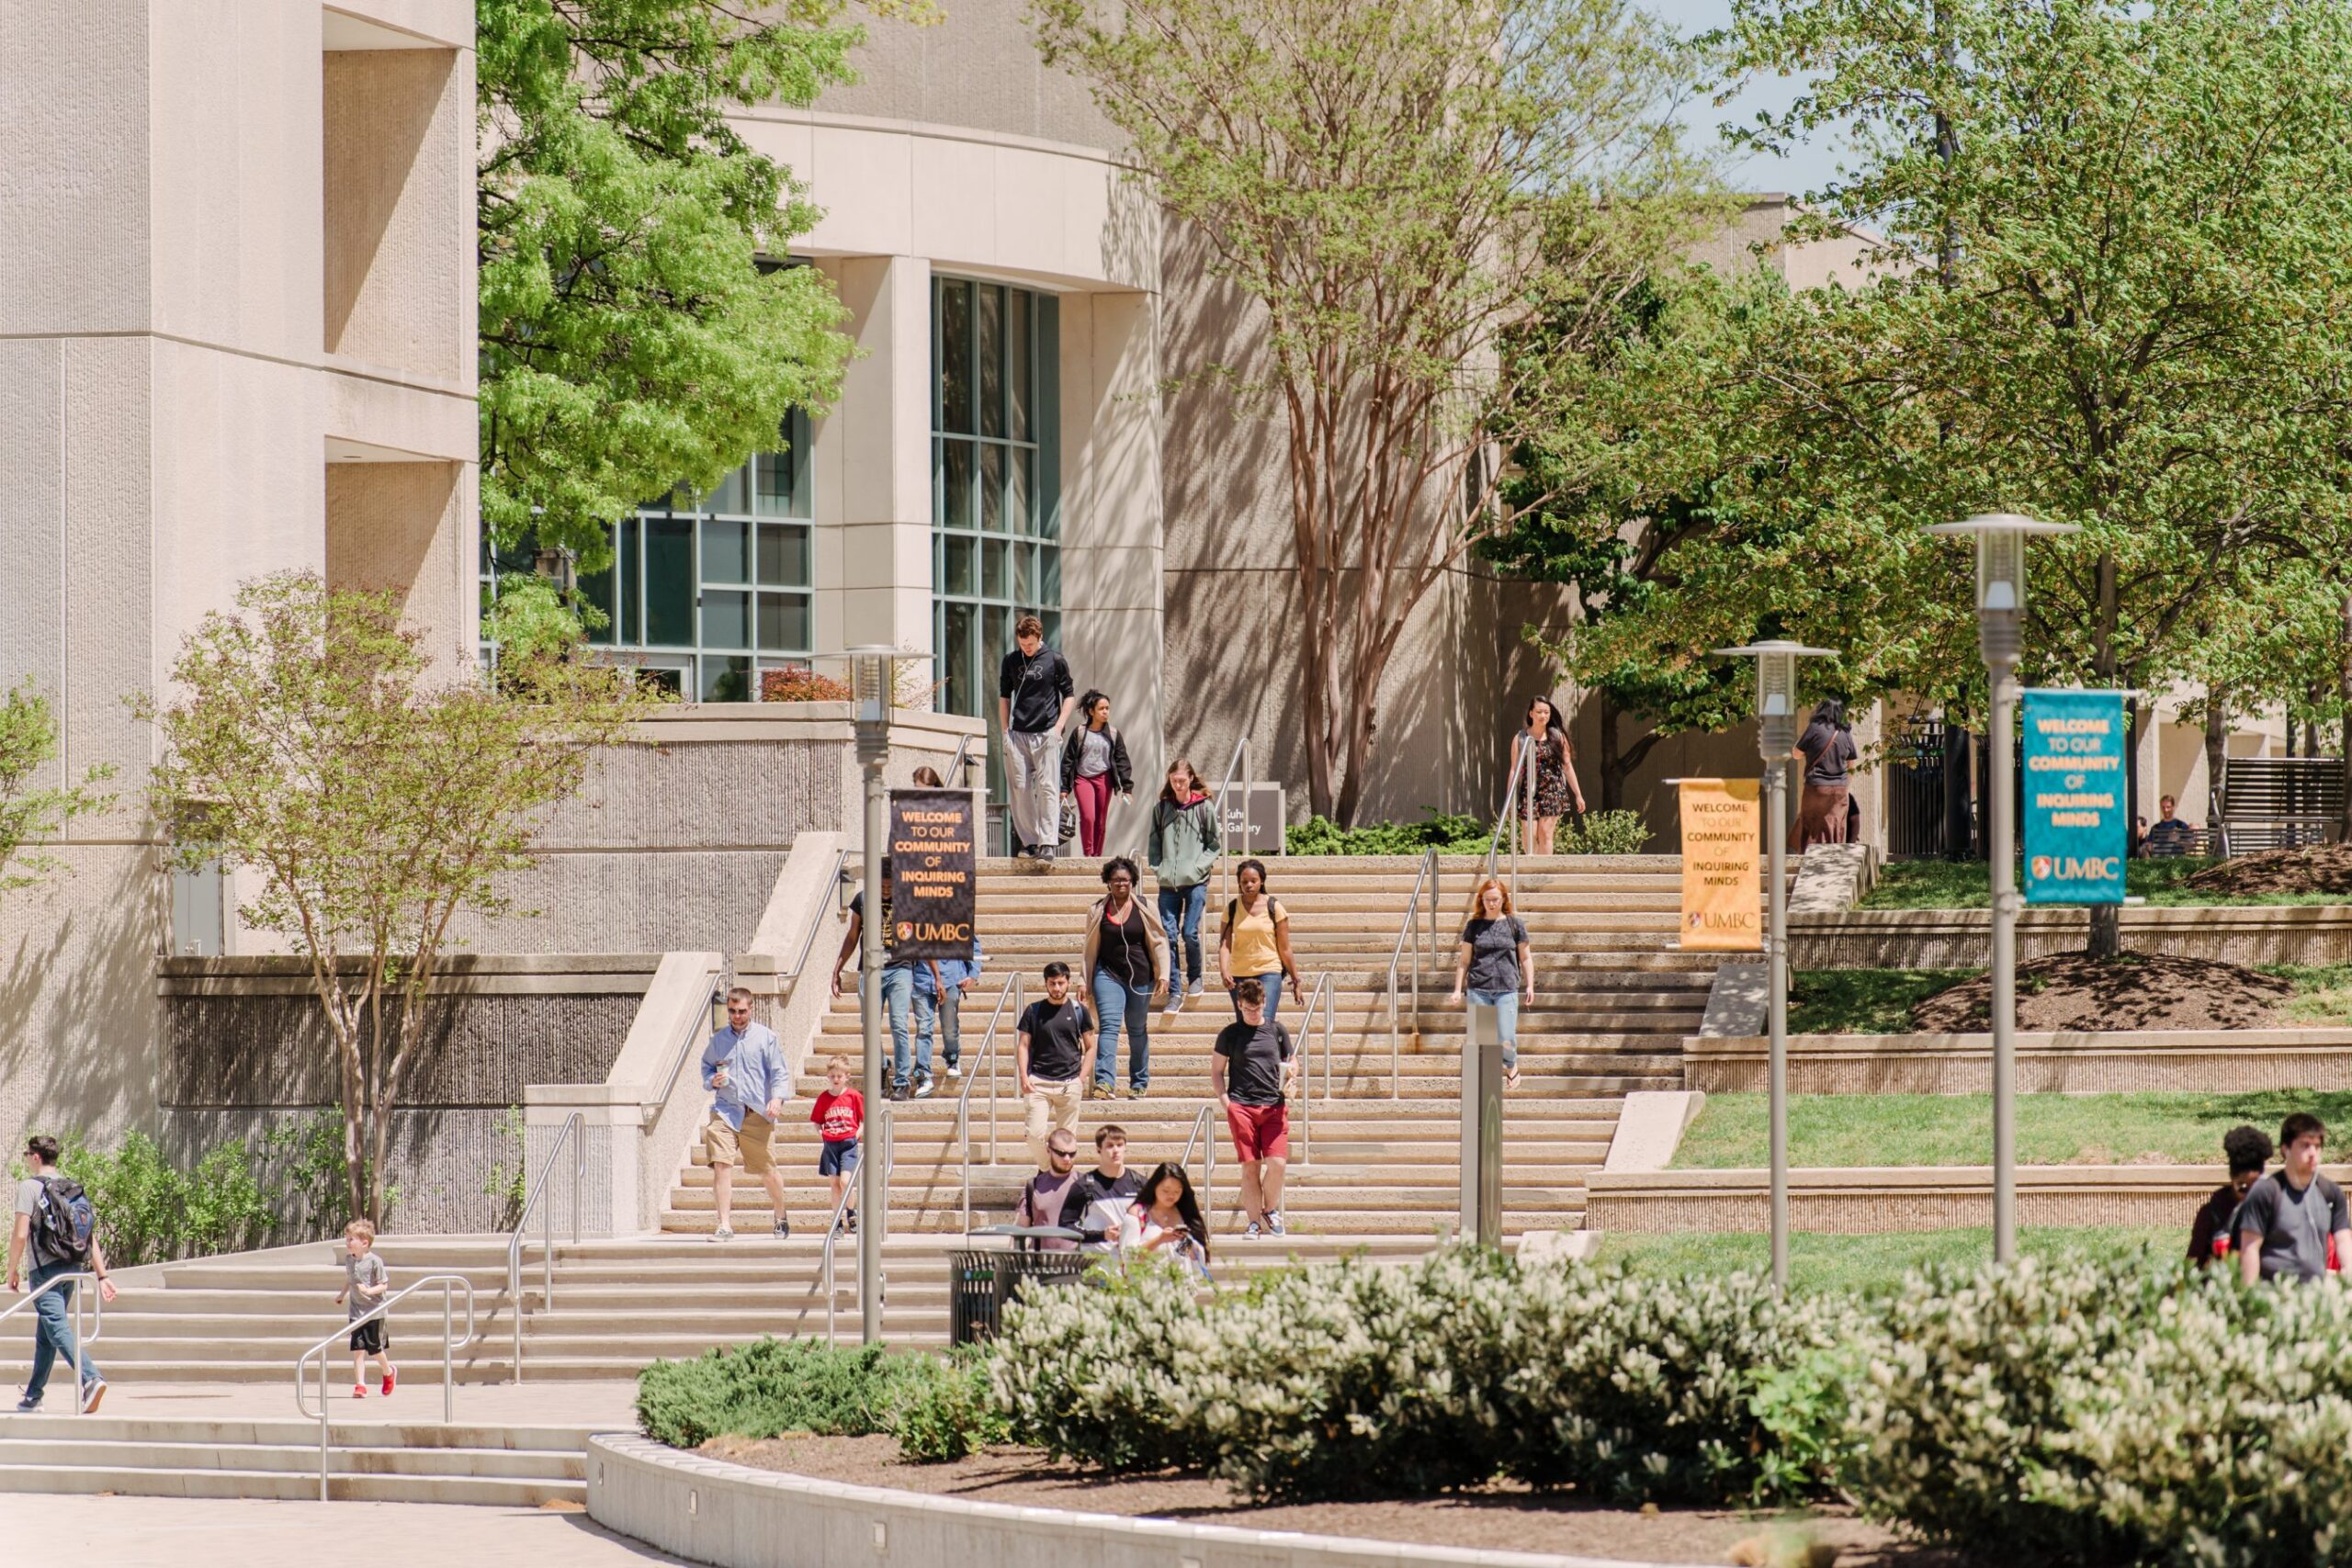 Business First Names UMBC One Of Nation's Best Public Universities